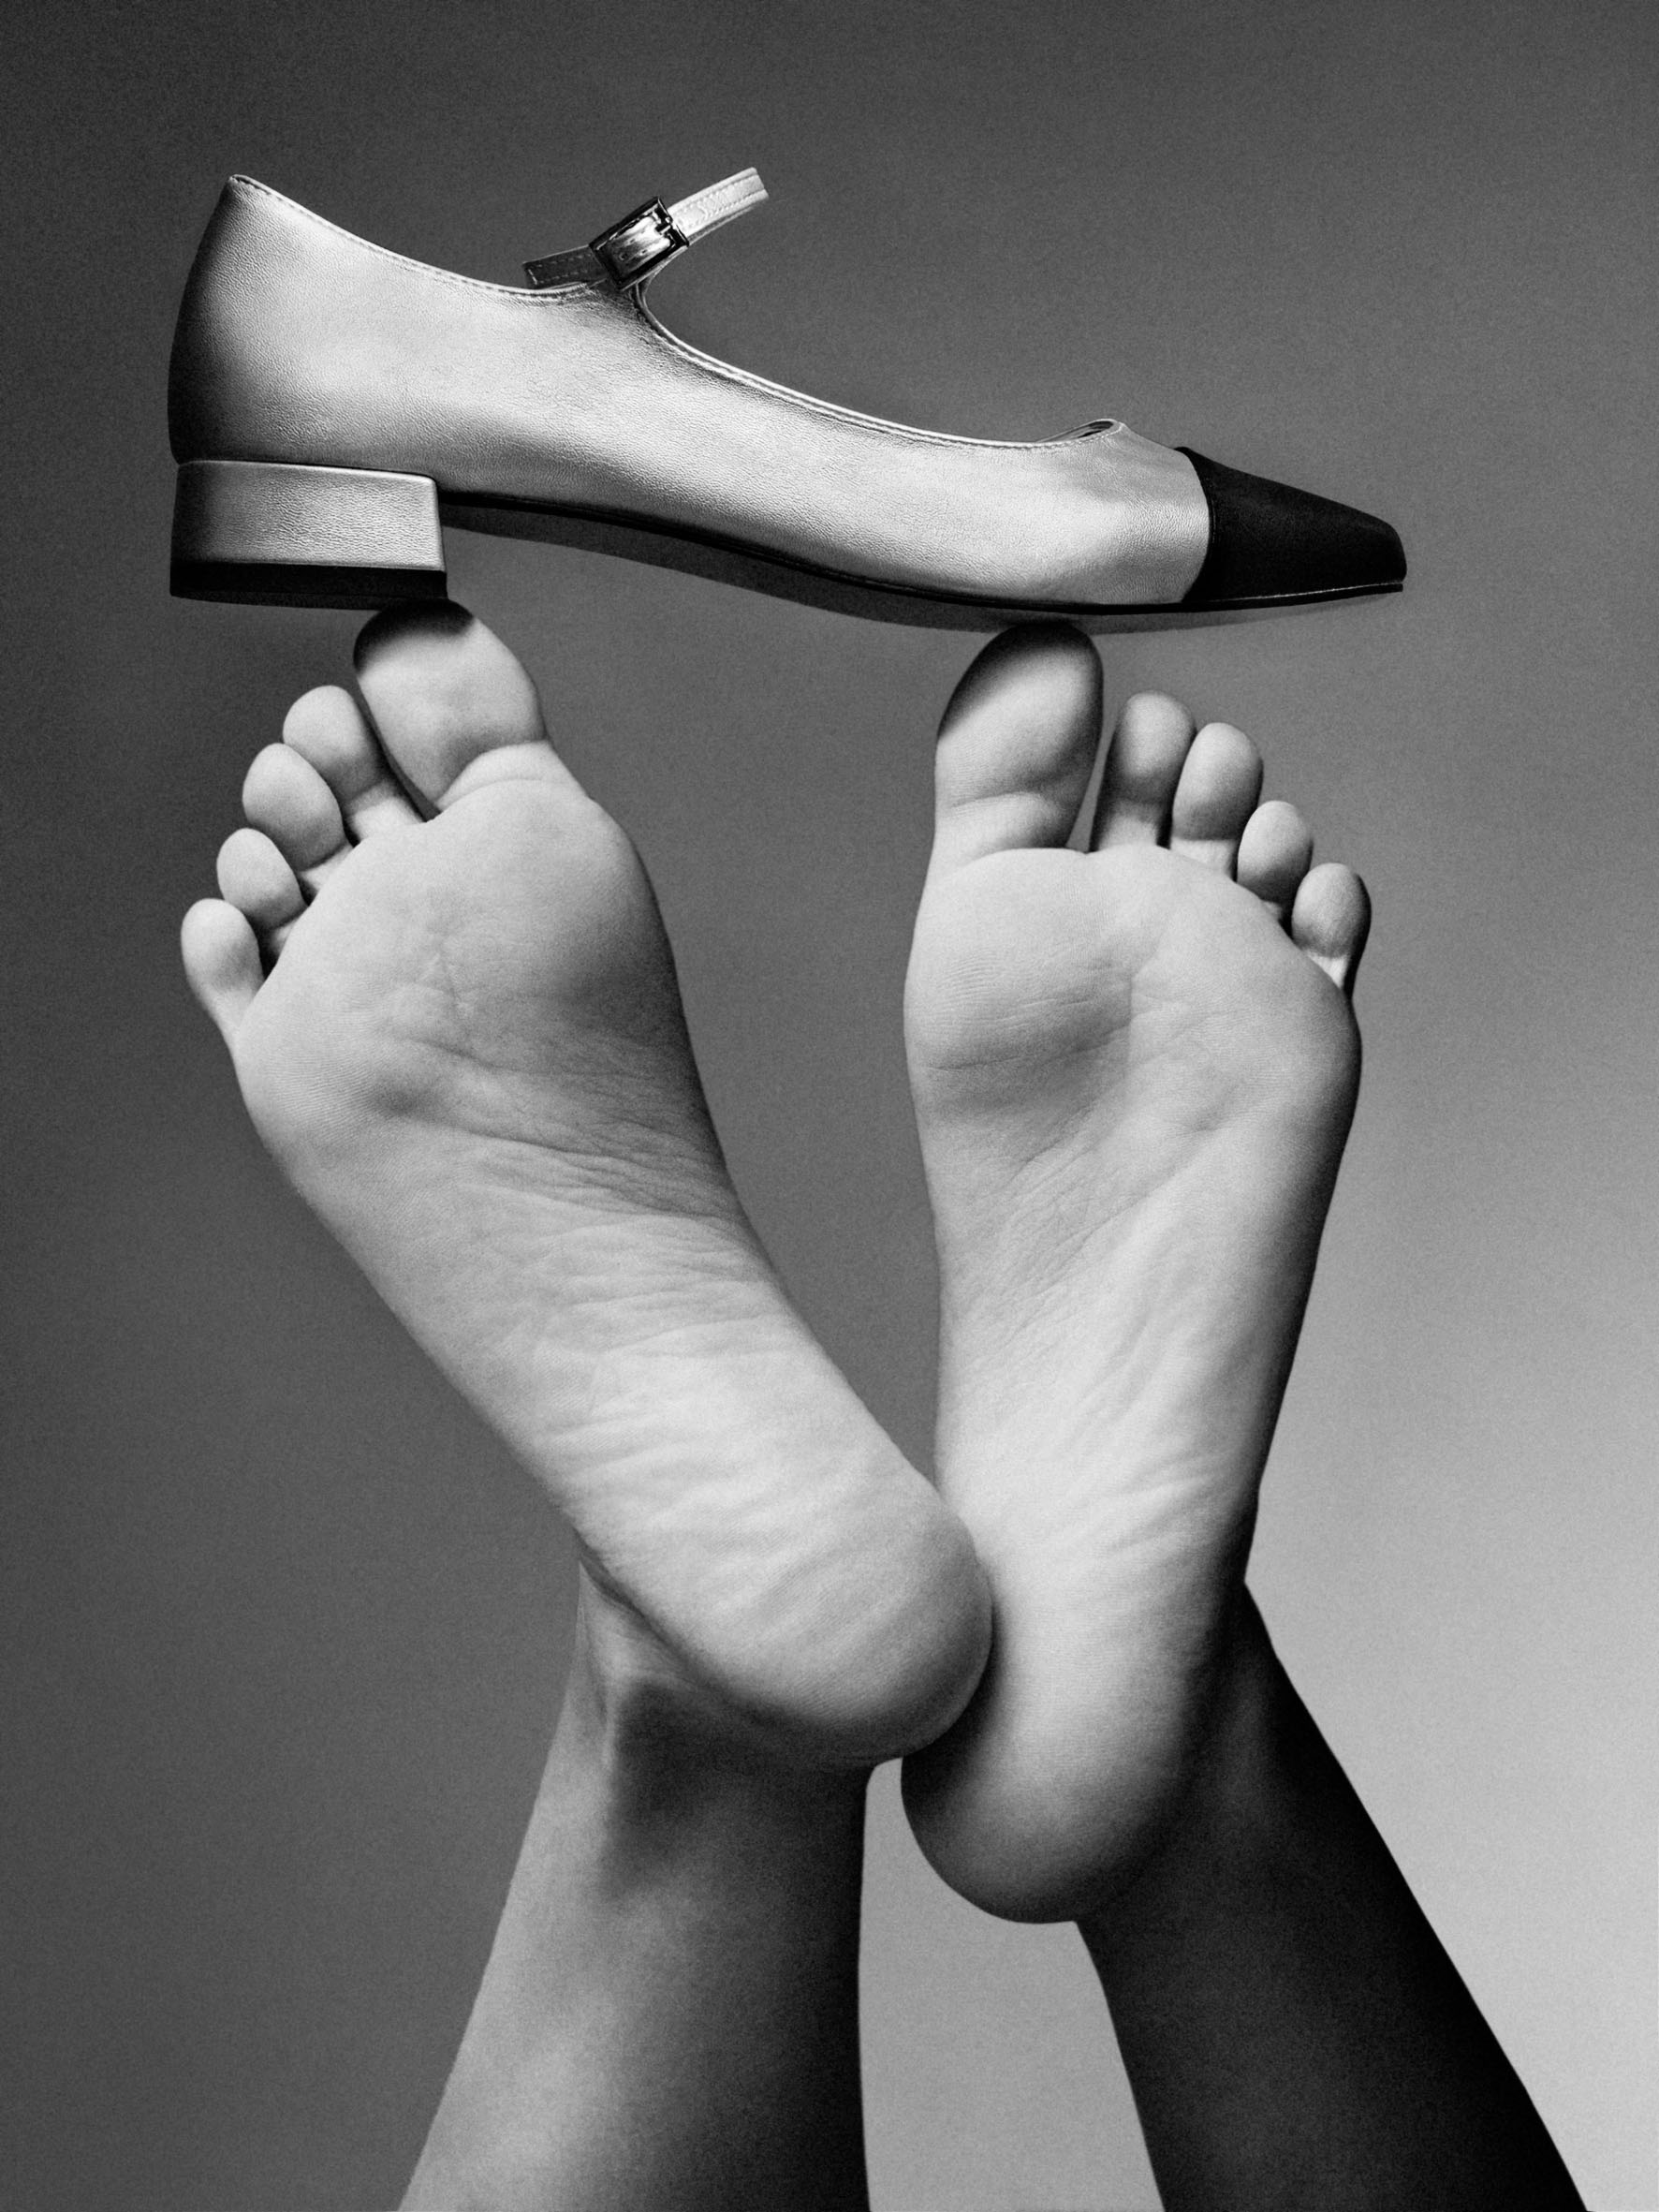 image of two feet holding a sandal in black and white